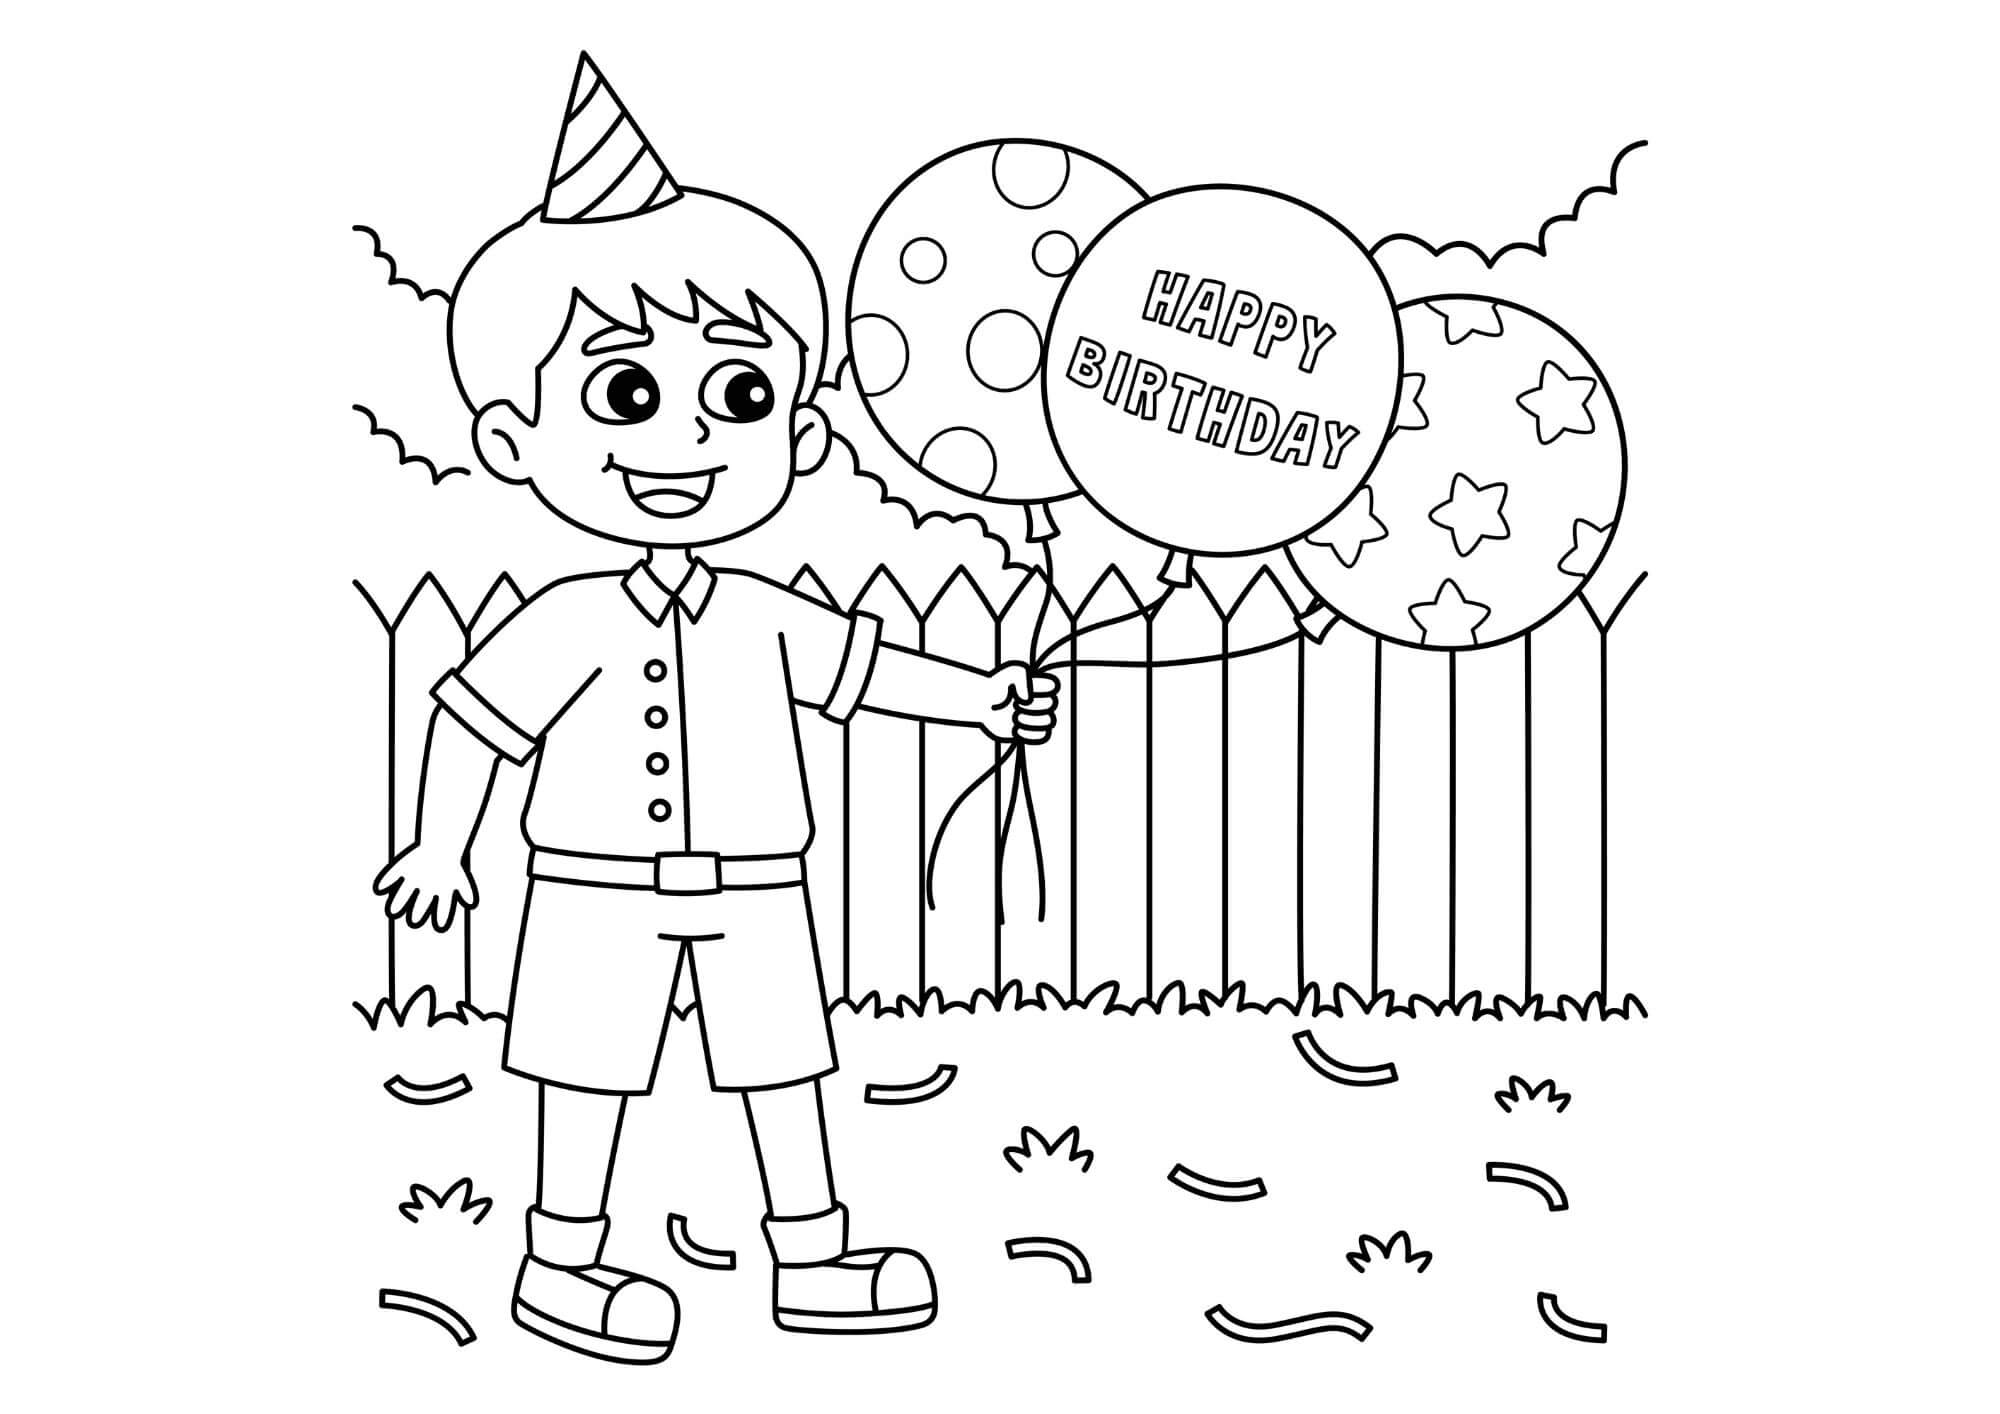 Happy Birthday coloring pages to print (free)